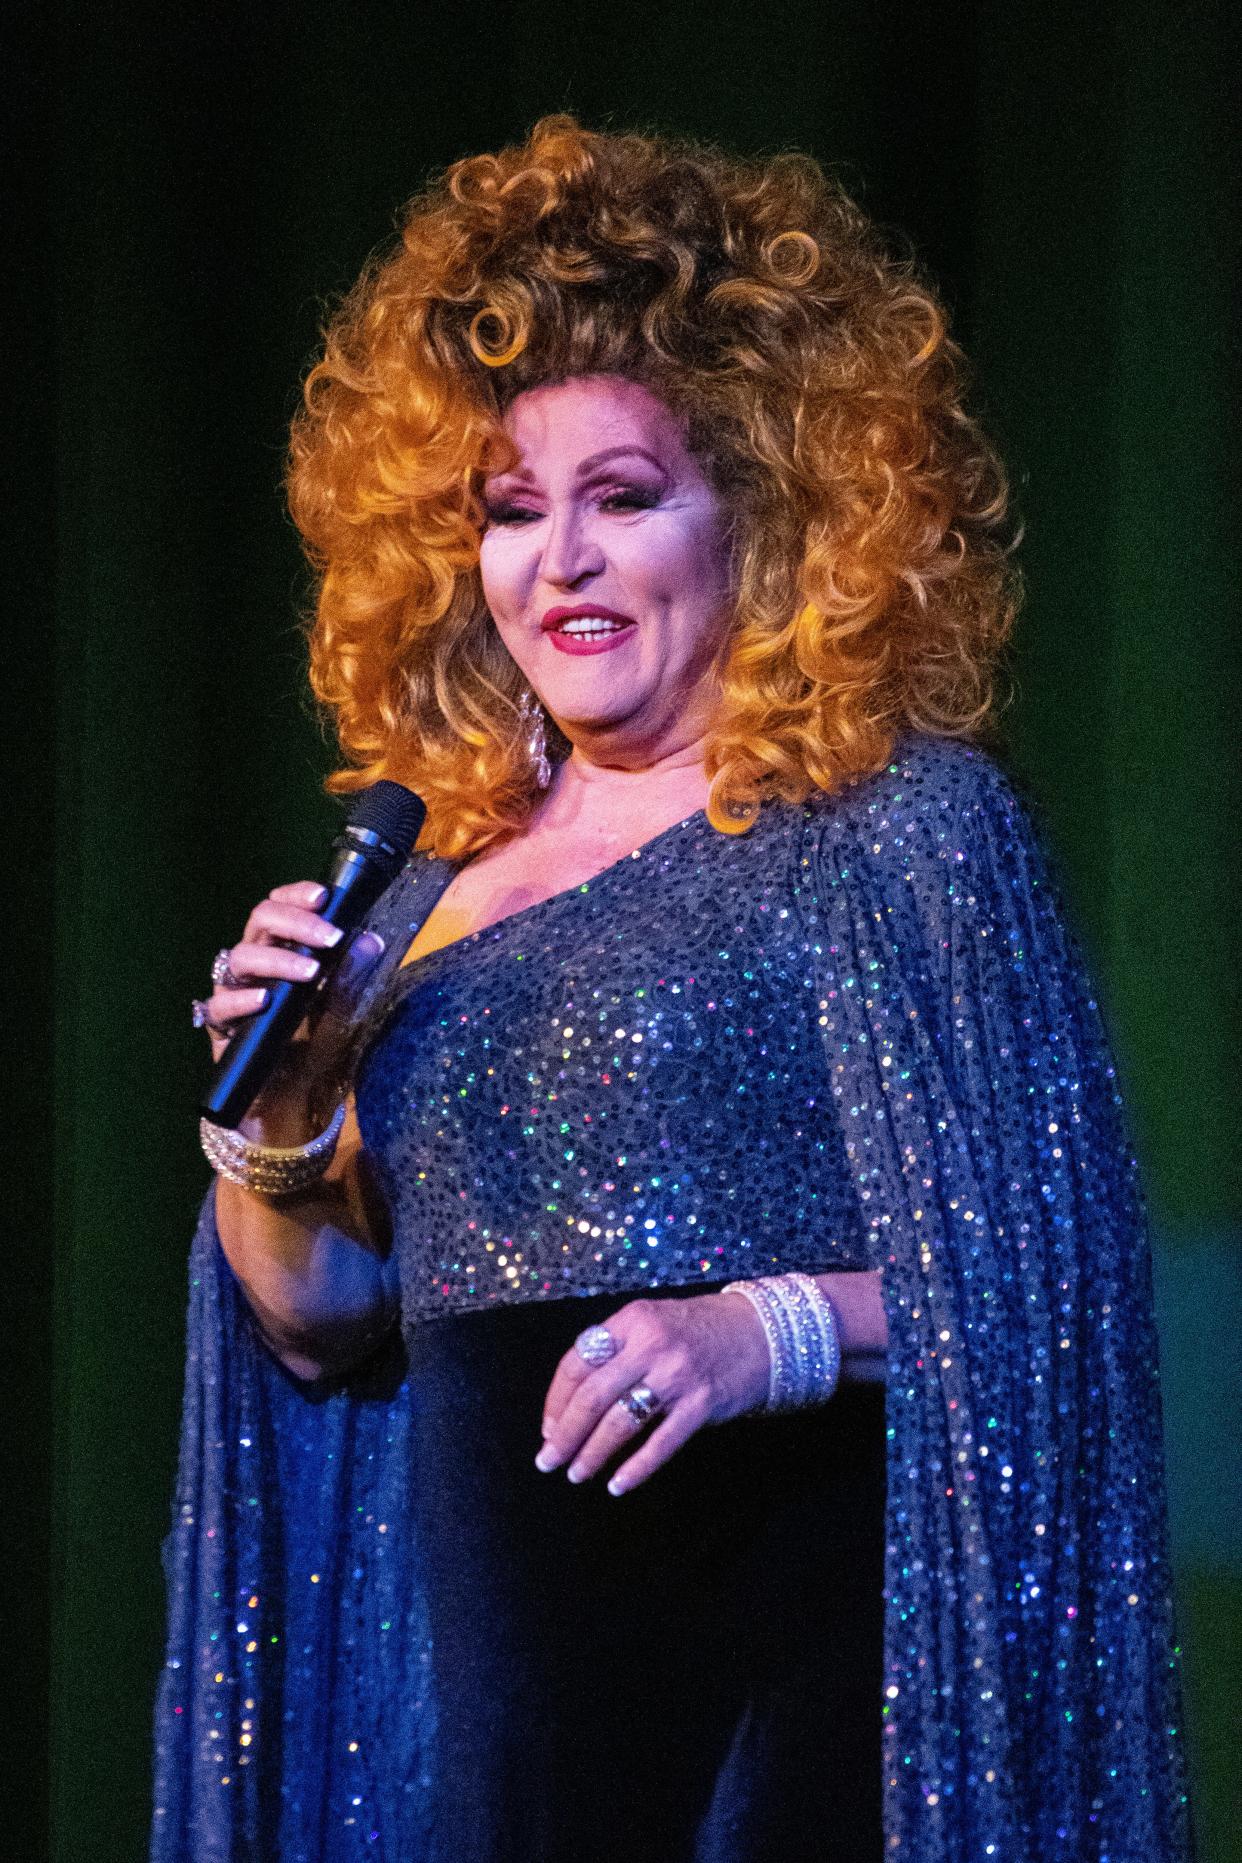 Female impersonator Denise Russell will perform at The Killing Tree Winery in Dresden on Friday.